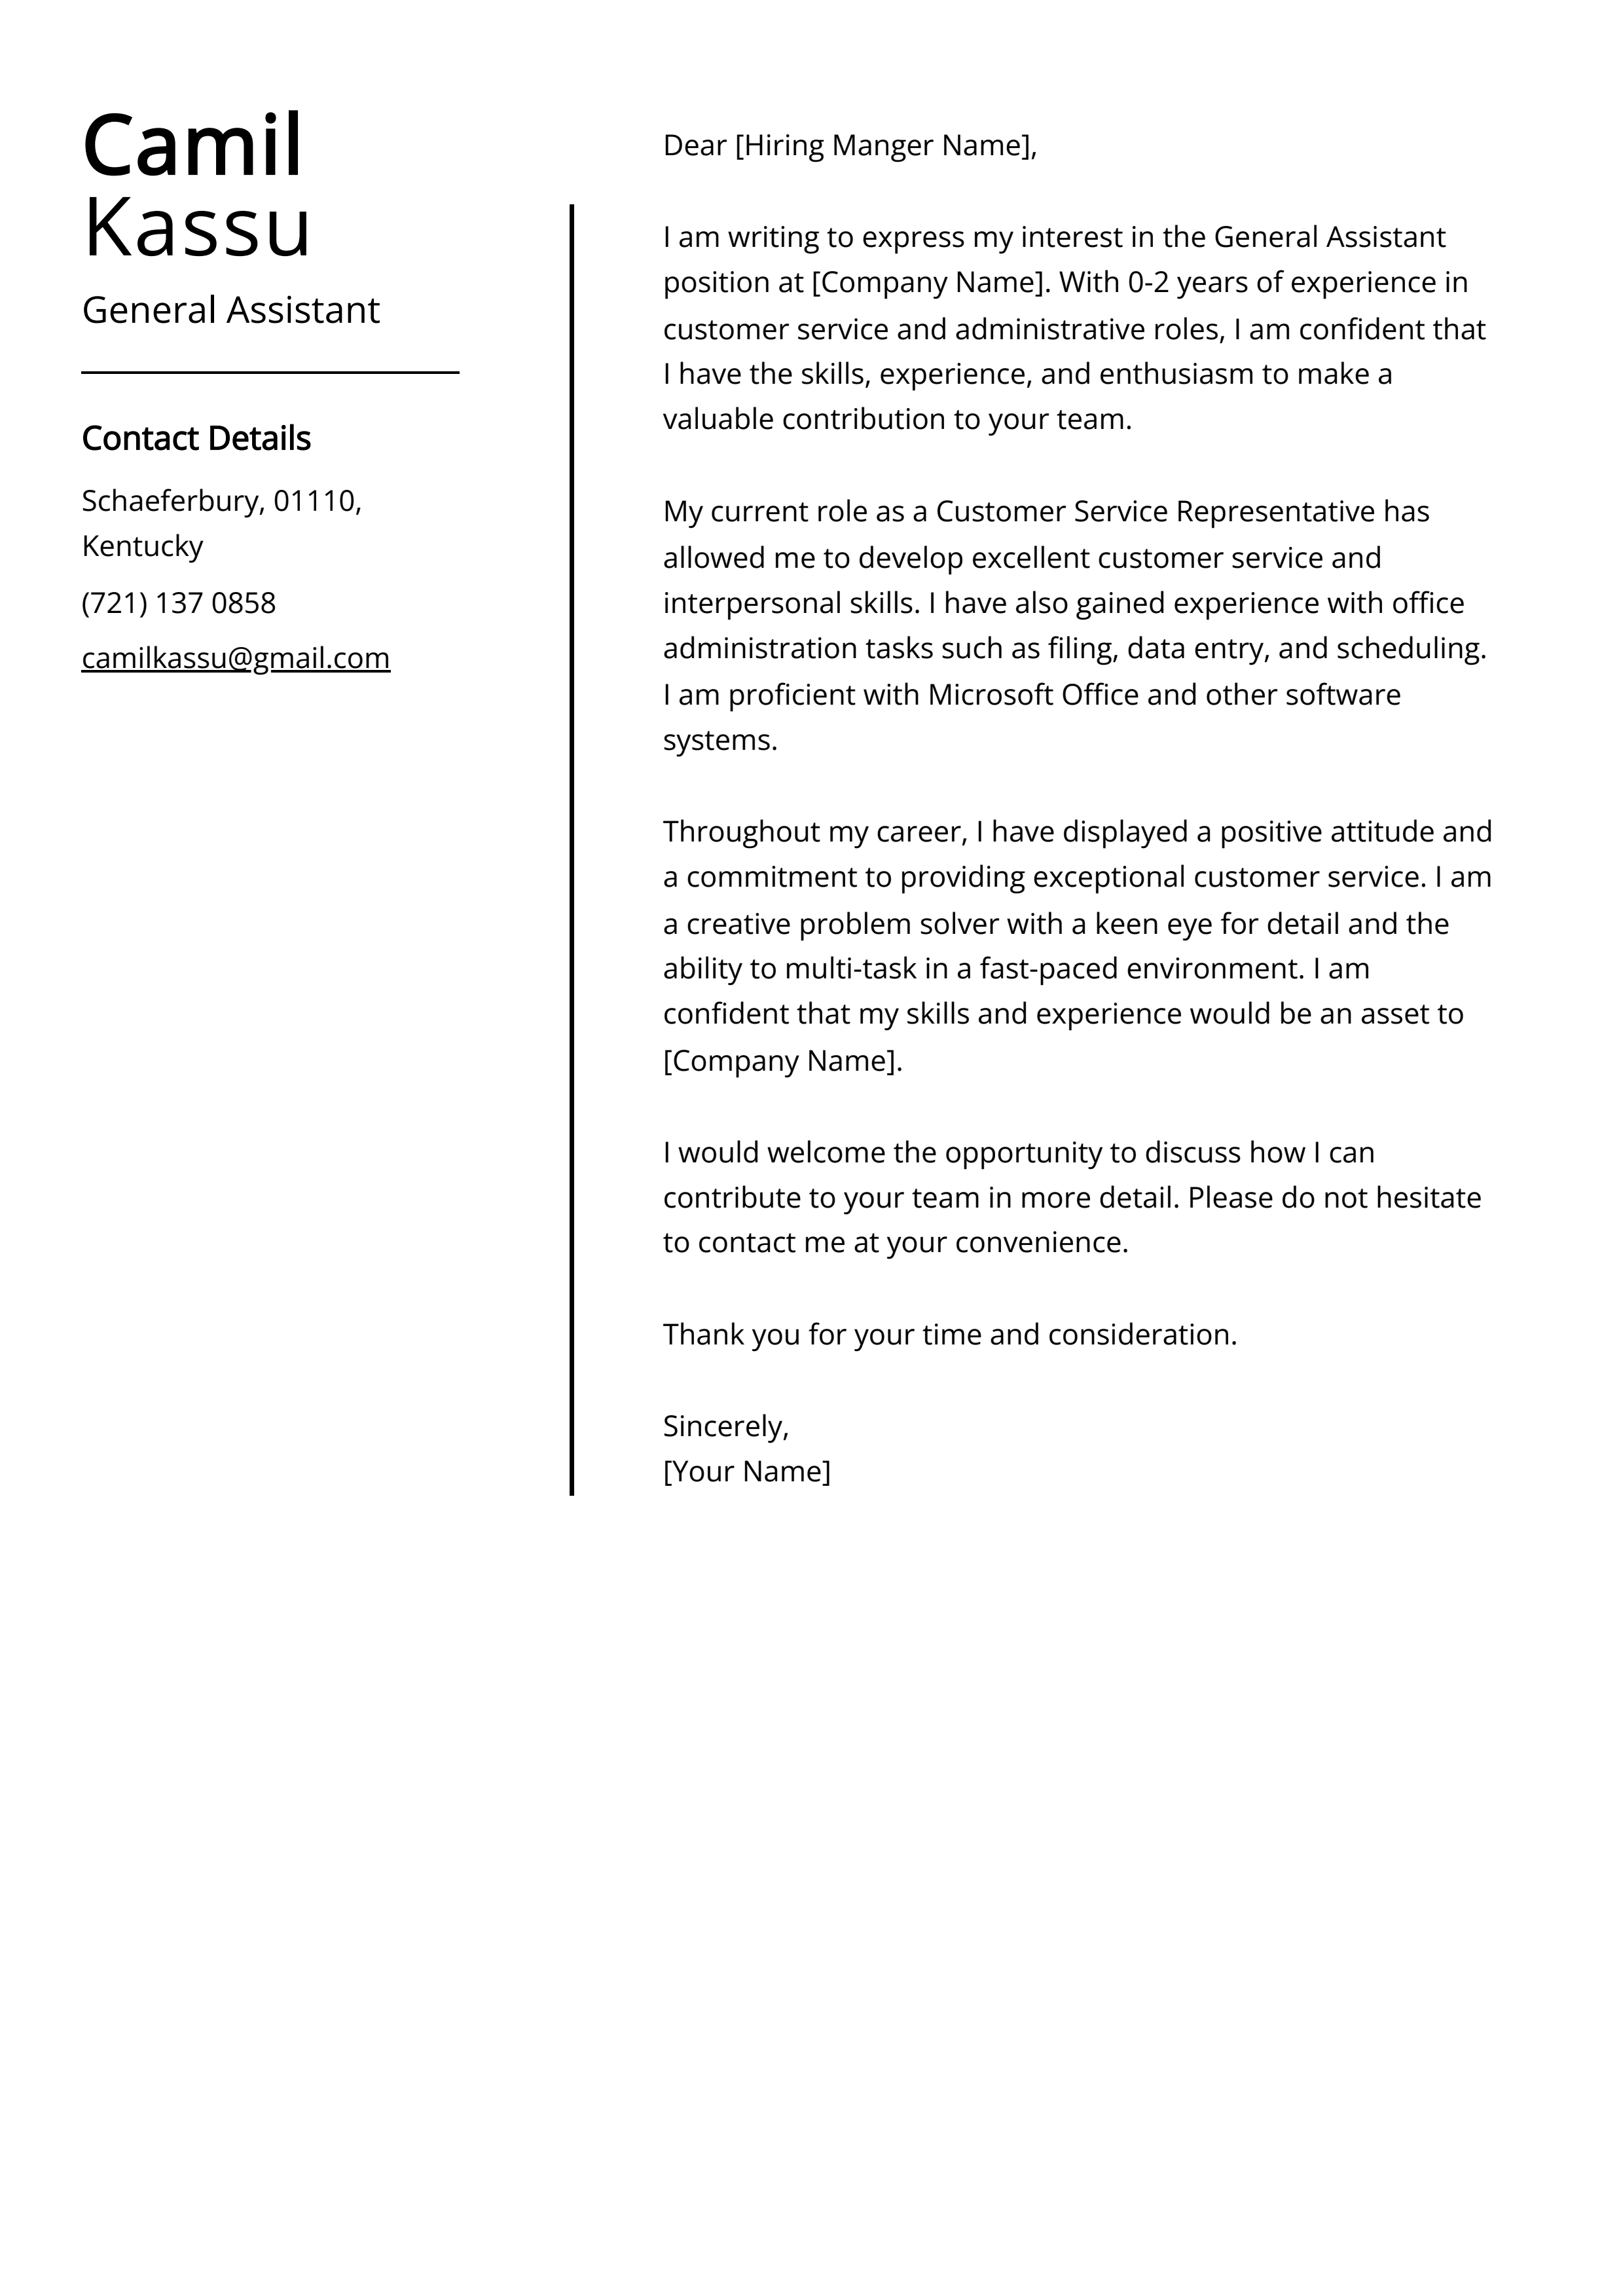 General Assistant Cover Letter Example